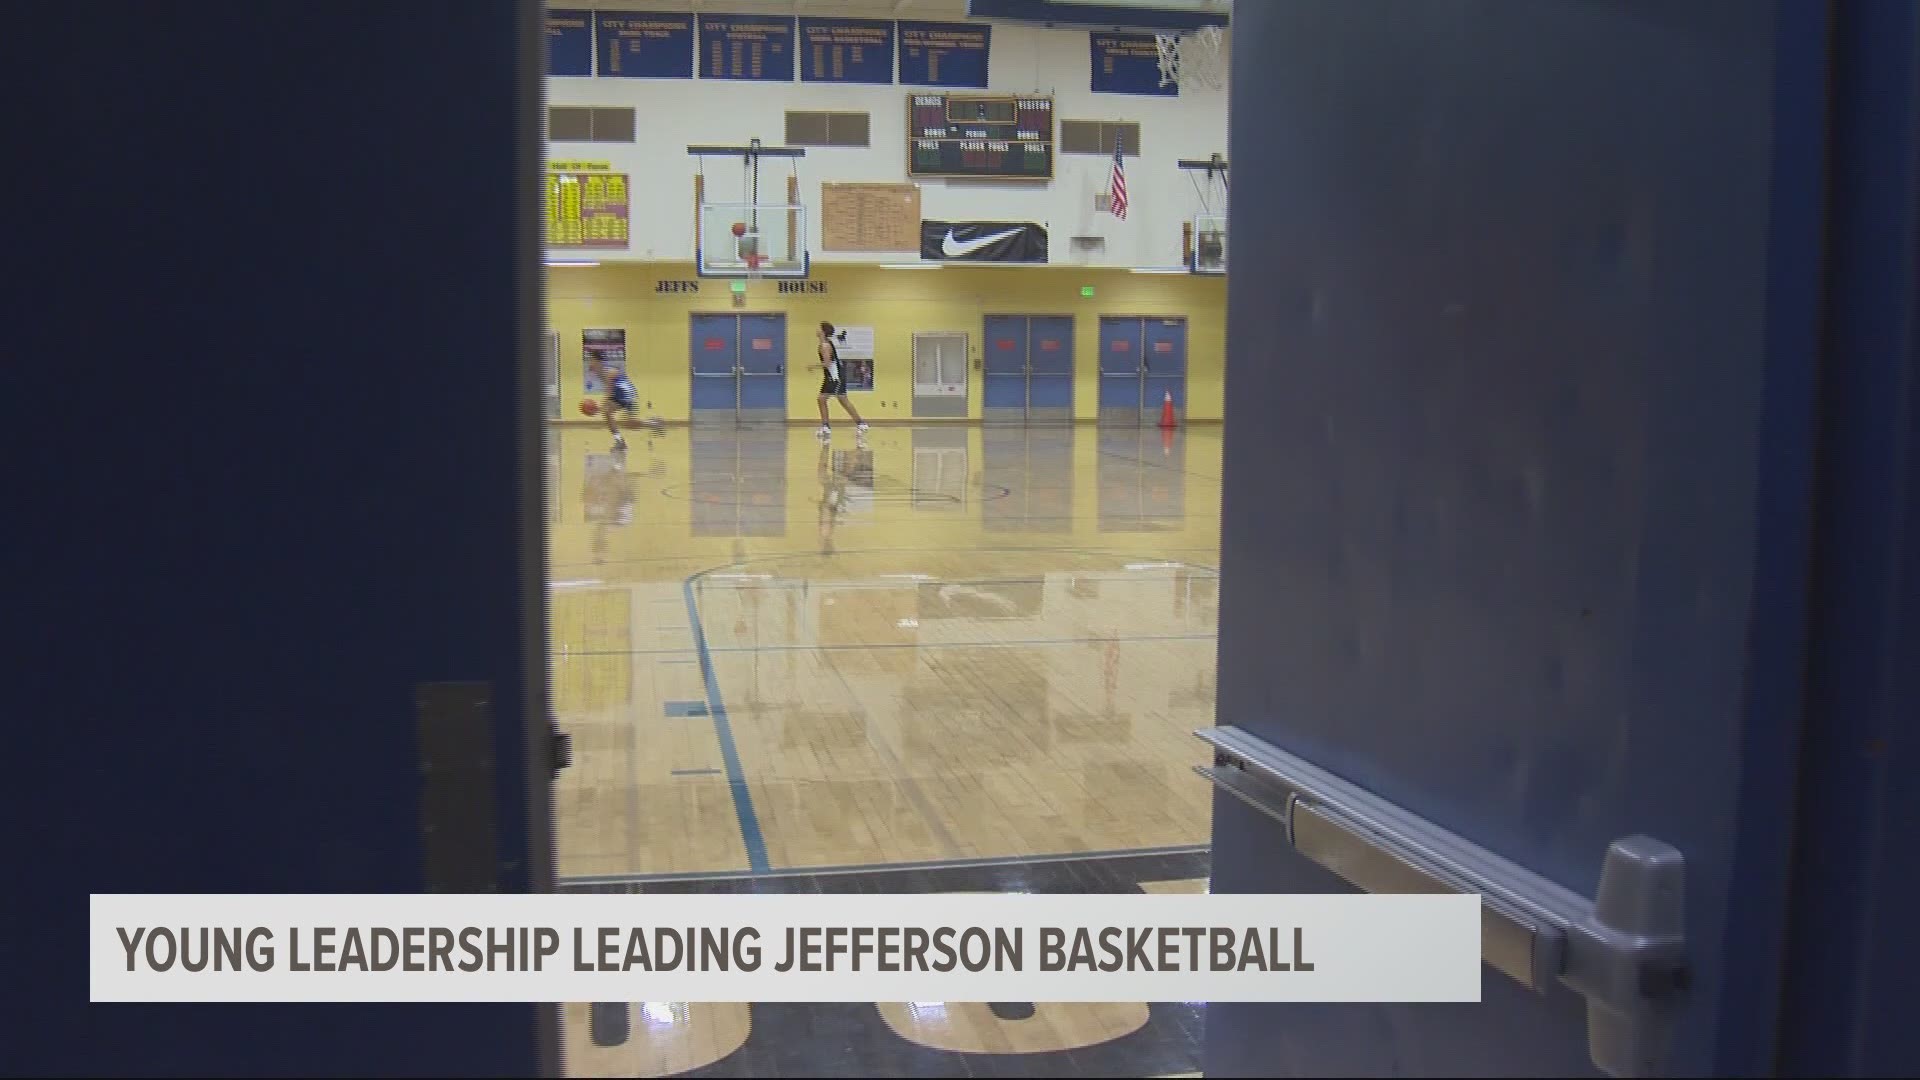 Jefferson High School is no stranger to competing for state championships. But this year the team is winning without any seniors.